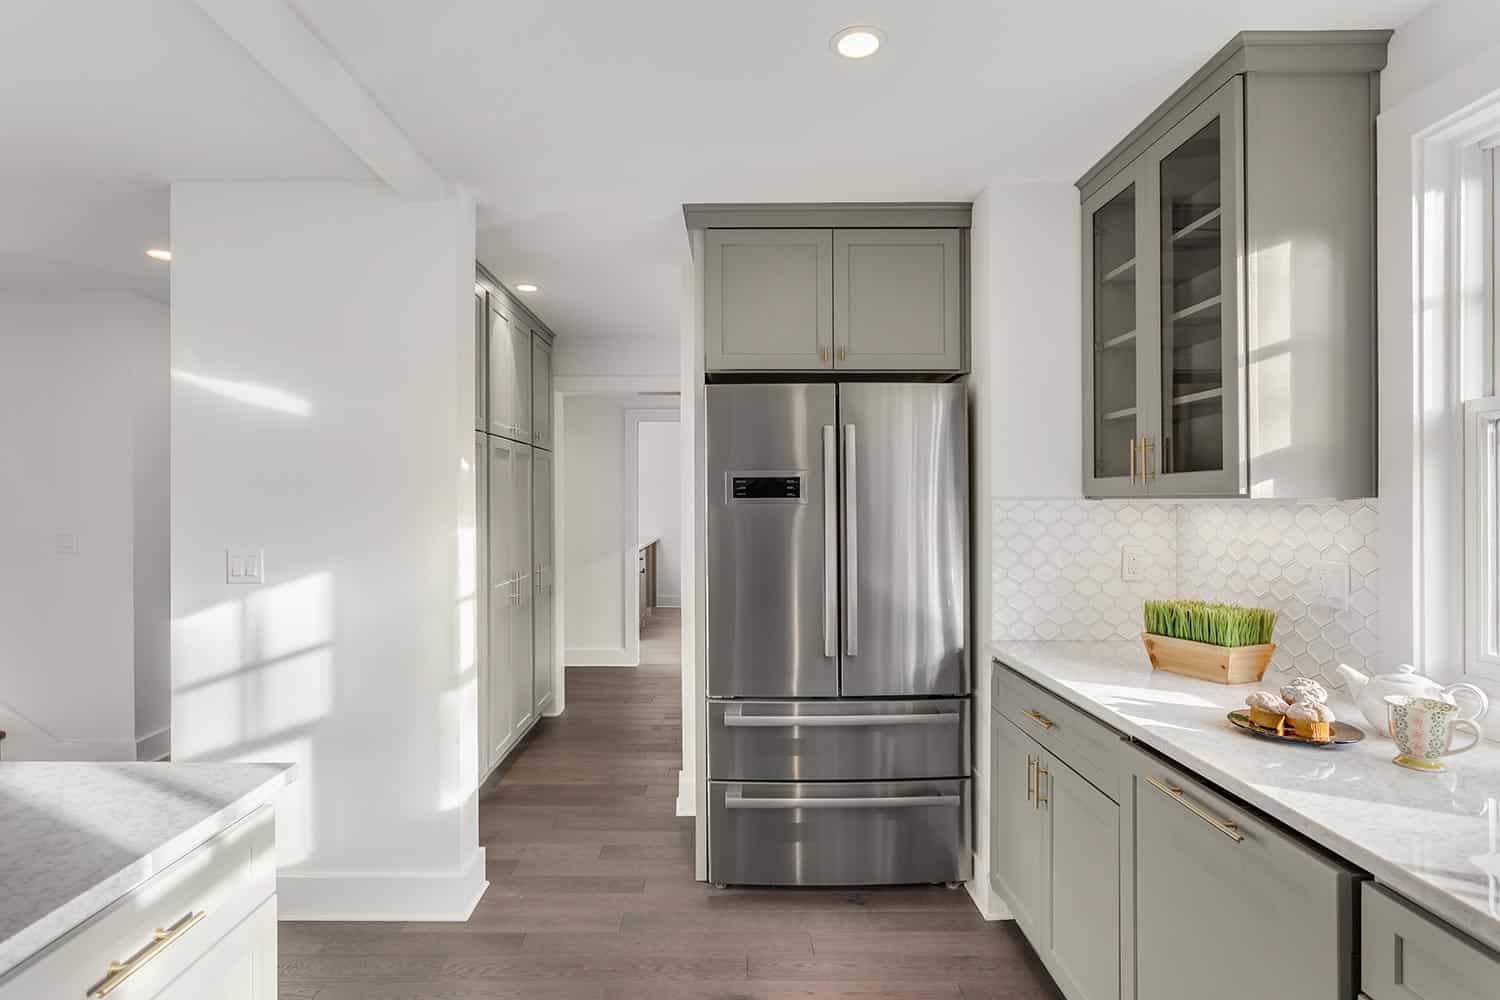 Stainless steel refrigerator in a newly remodeled home